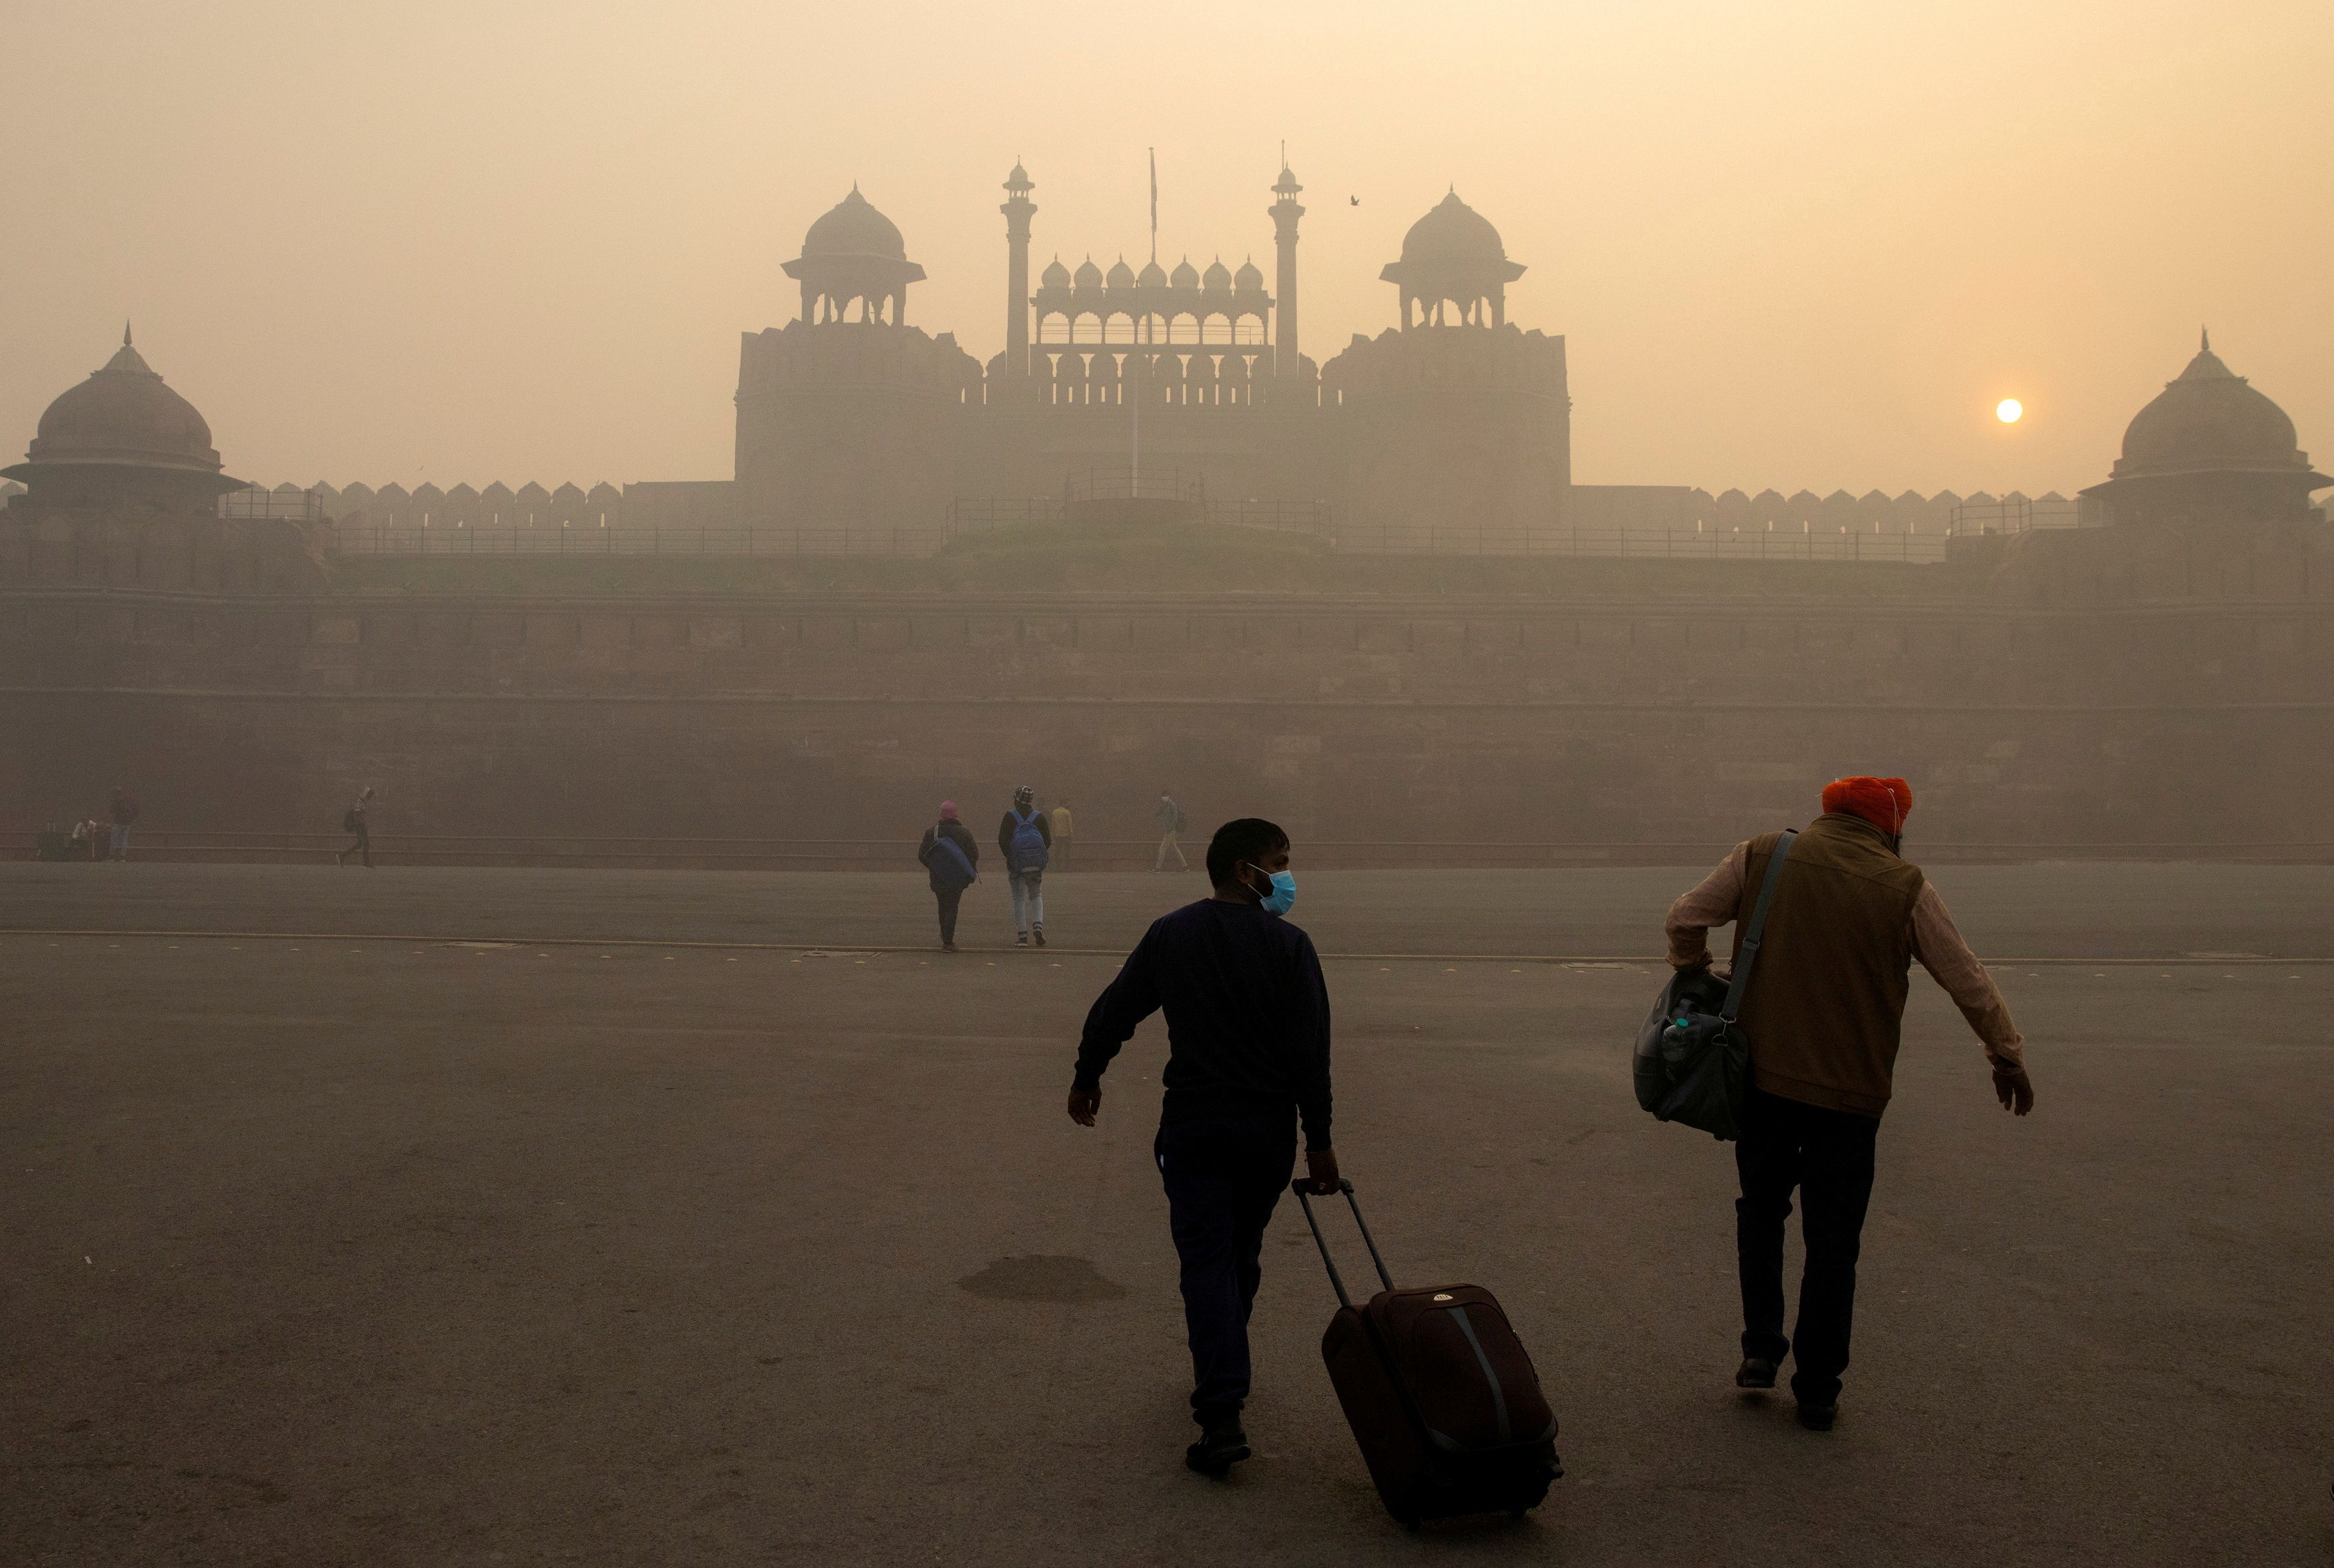 People arrive to visit the Red Fort on a smoggy morning in the old quarters of Delhi